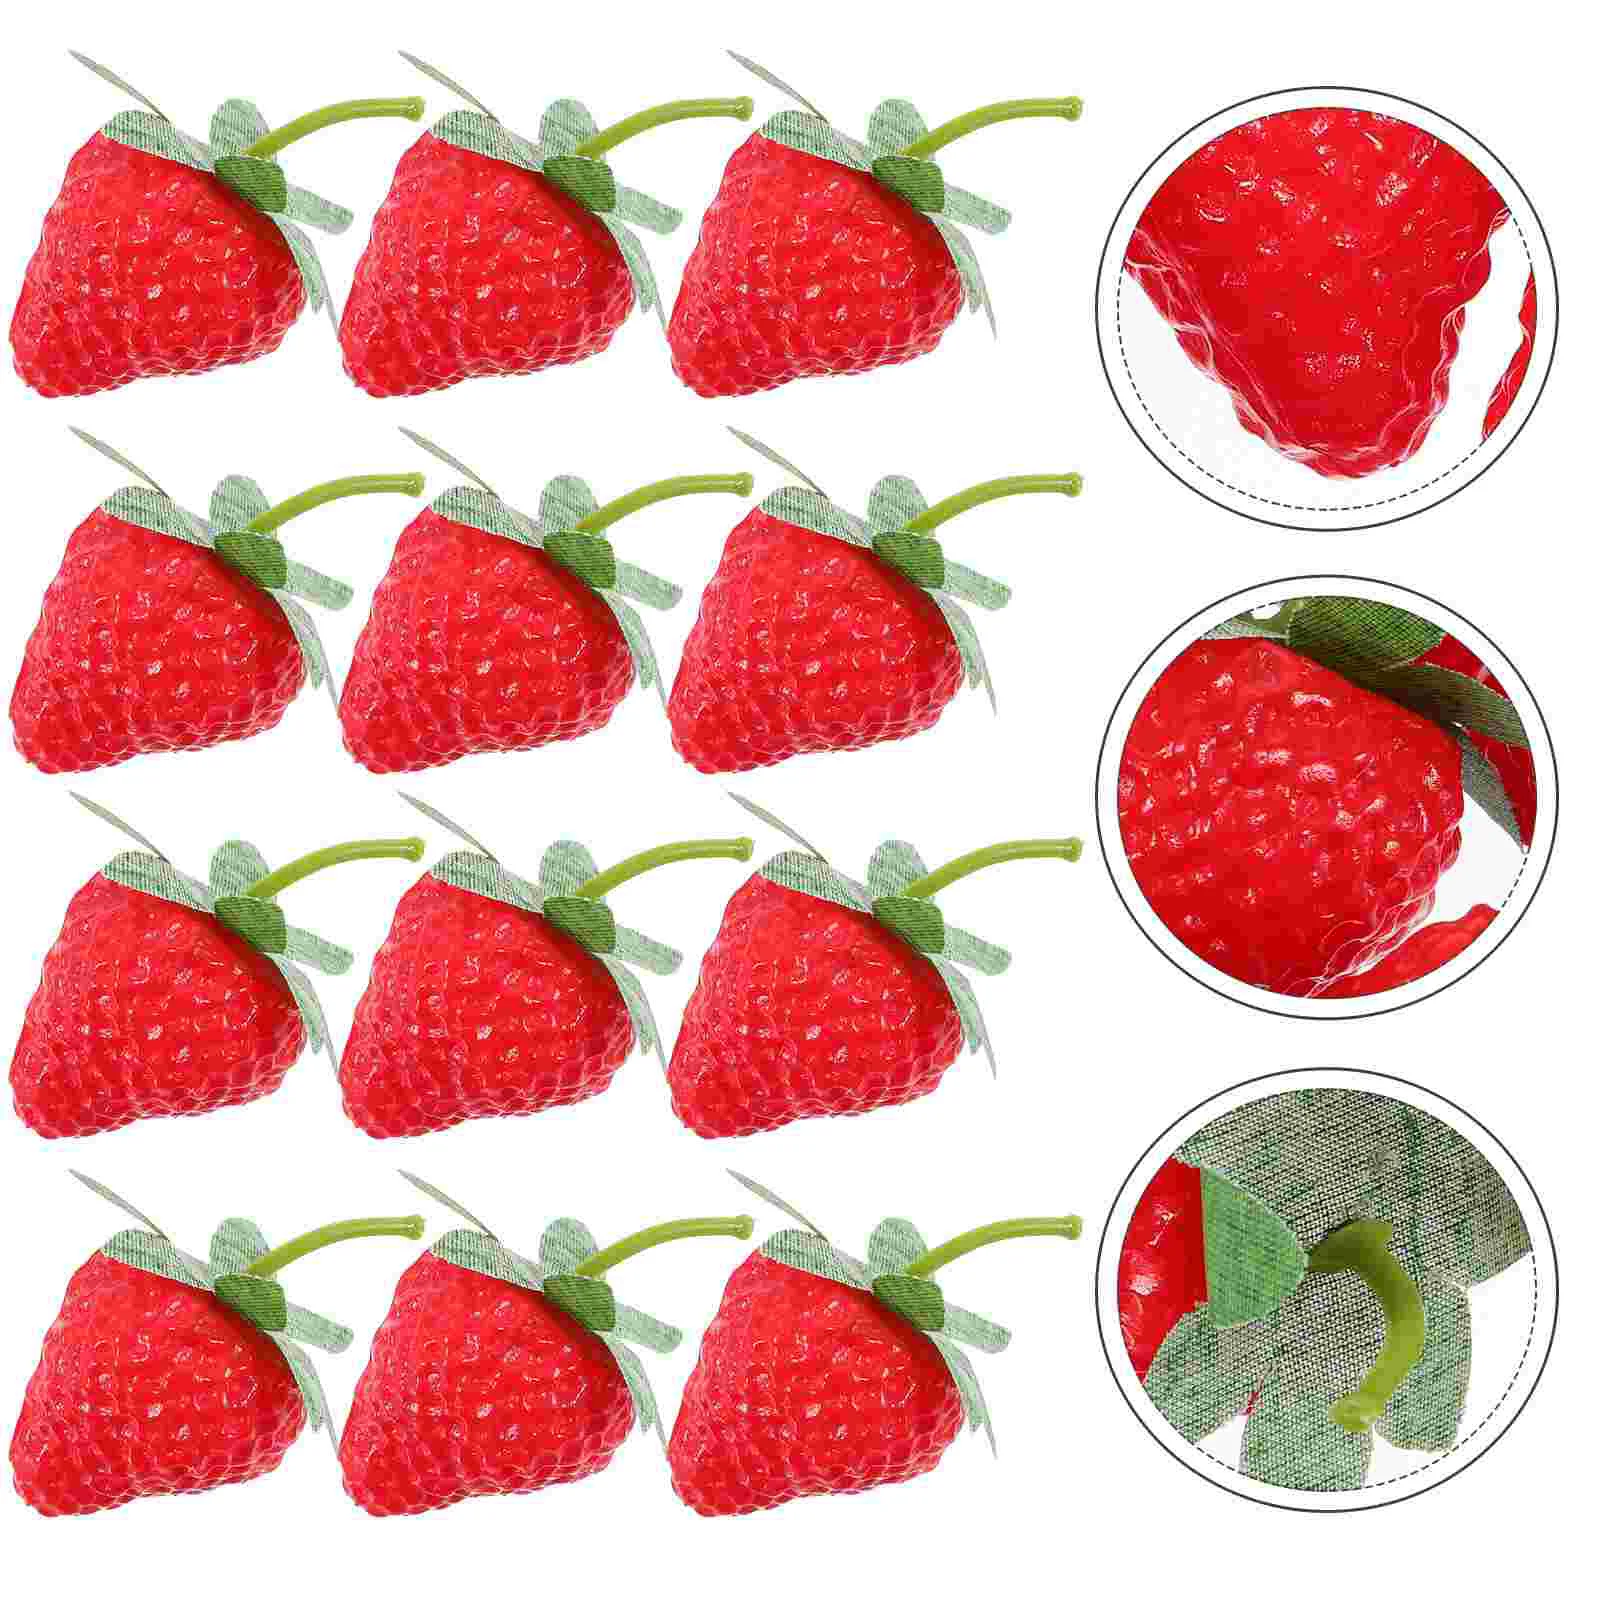 

24 Pcs Simulated Strawberry Model Decor Ornaments Fake Fruits Artificial Decoration Strawberries Props Birthday Decorations